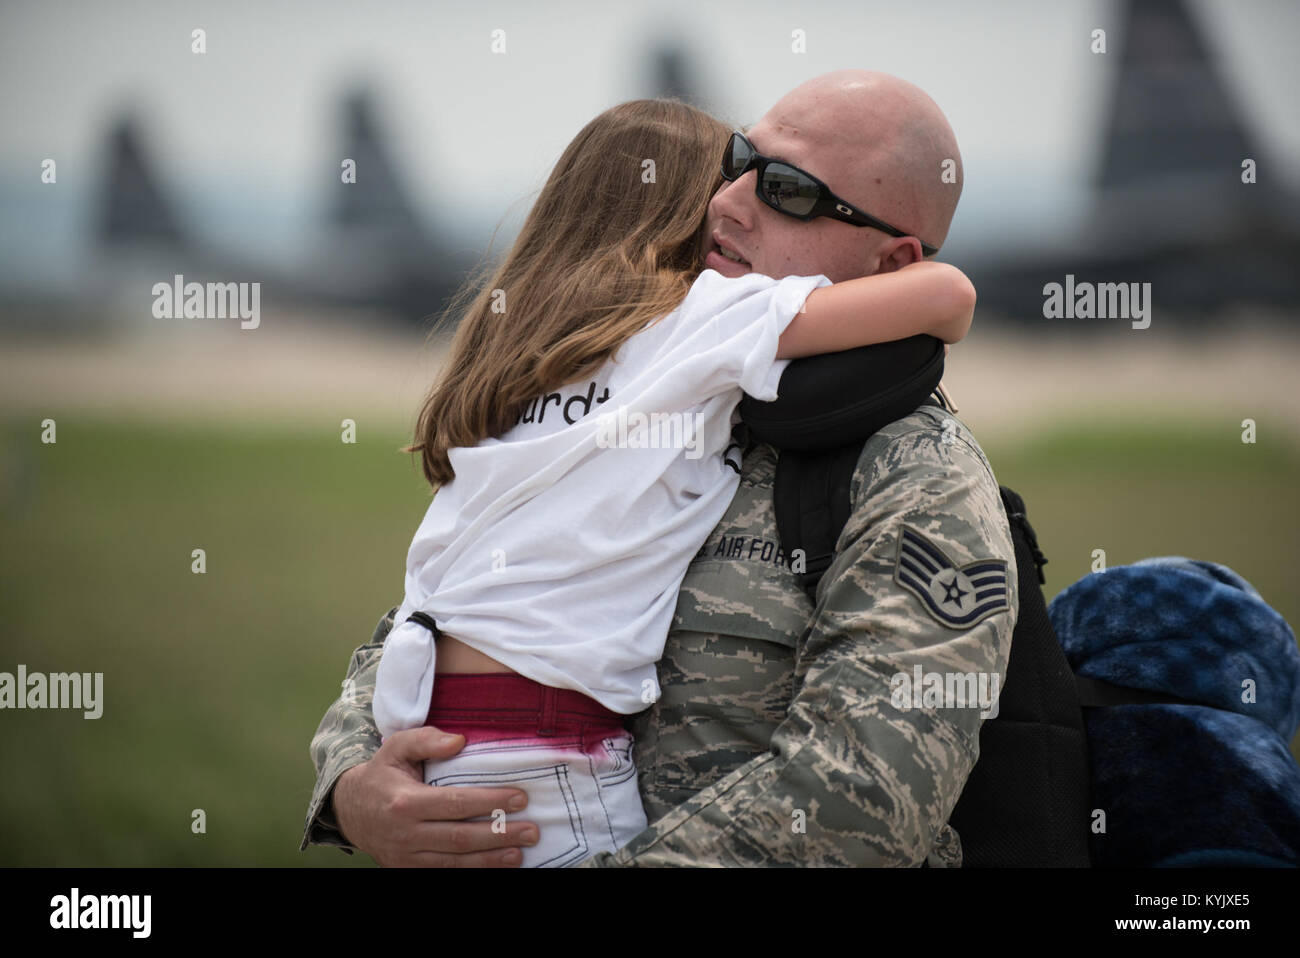 Staff Sgt. Brent Reichardt, an aircraft hydraulics specialist in the 123rd Airlift Wing, hugs his daughter during an emotional homecoming ceremony at the Kentucky Air National Guard Base in Louisville, Ky., July 4, 2015. Reichardt was among 39 Kentucky Air Guardsmen who were returning from a deployment to the Persian Gulf region, where they've been supporting Operation Freedom's Sentinel since February. (U.S. Air National Guard photo by Maj. Dale Greer) Stock Photo